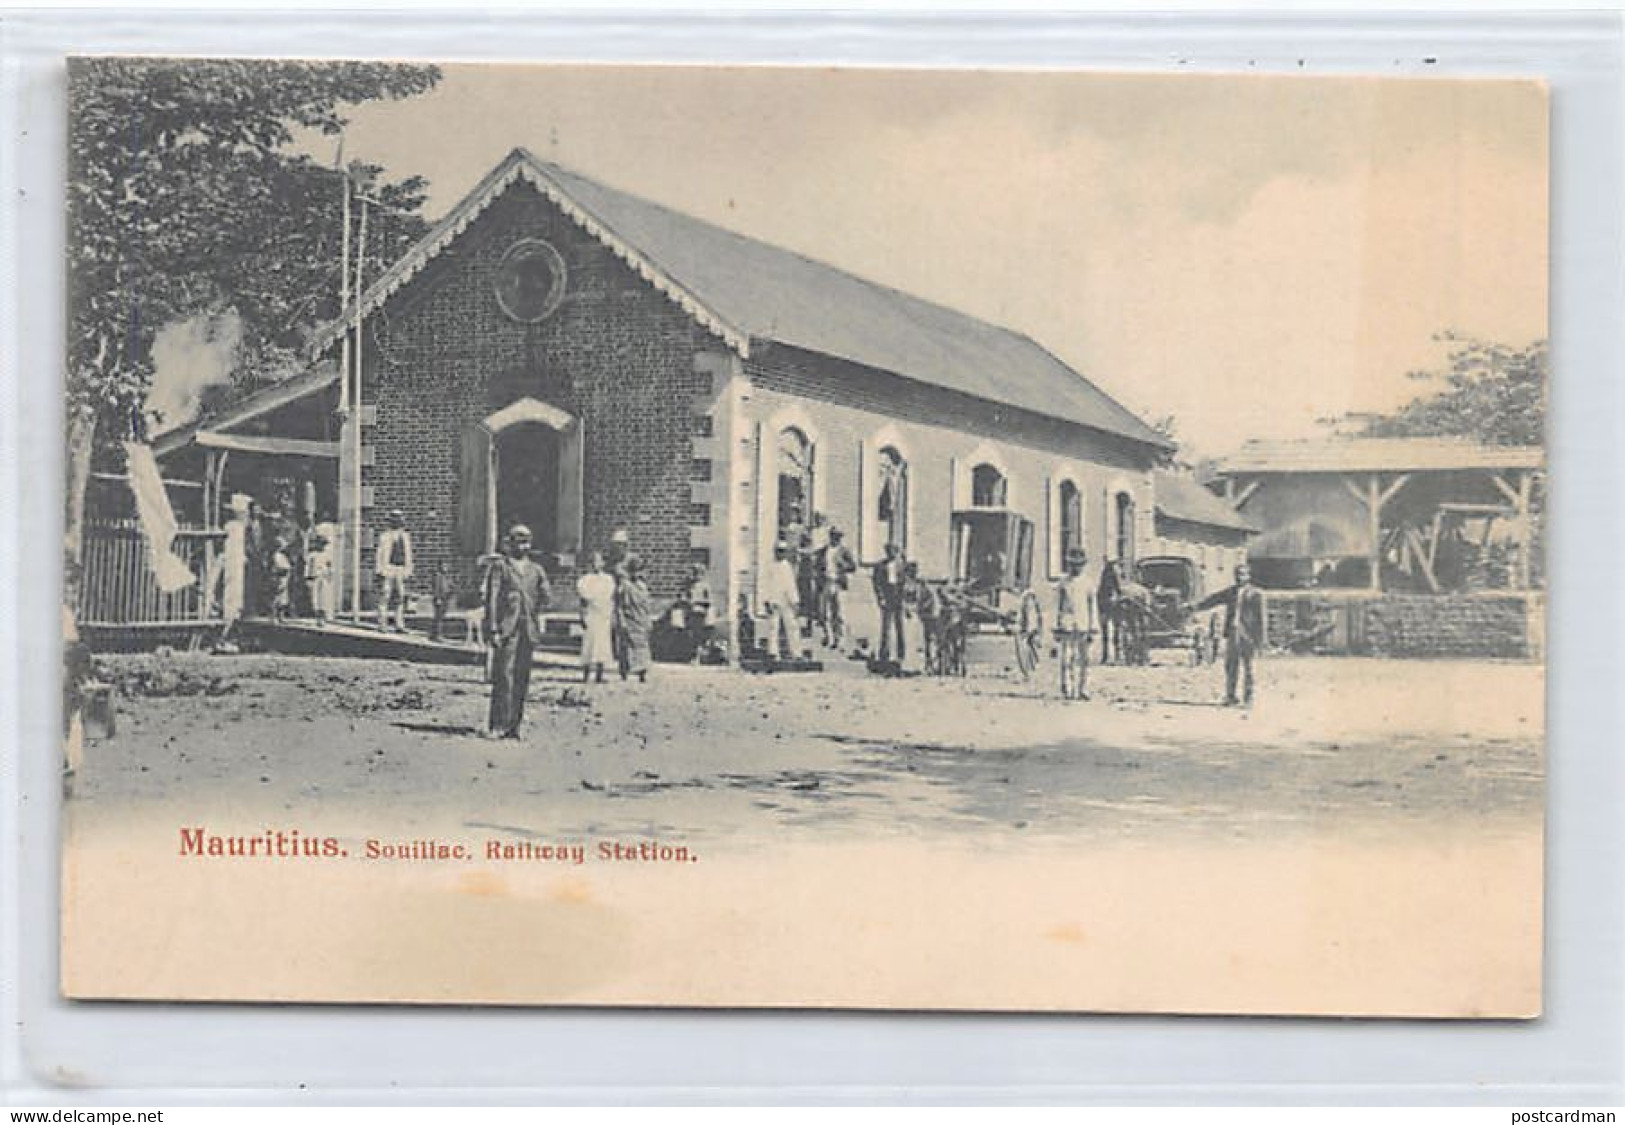 Mauritius - SOUILLAC - Railway Station - Publ. Unknown  - Mauritius